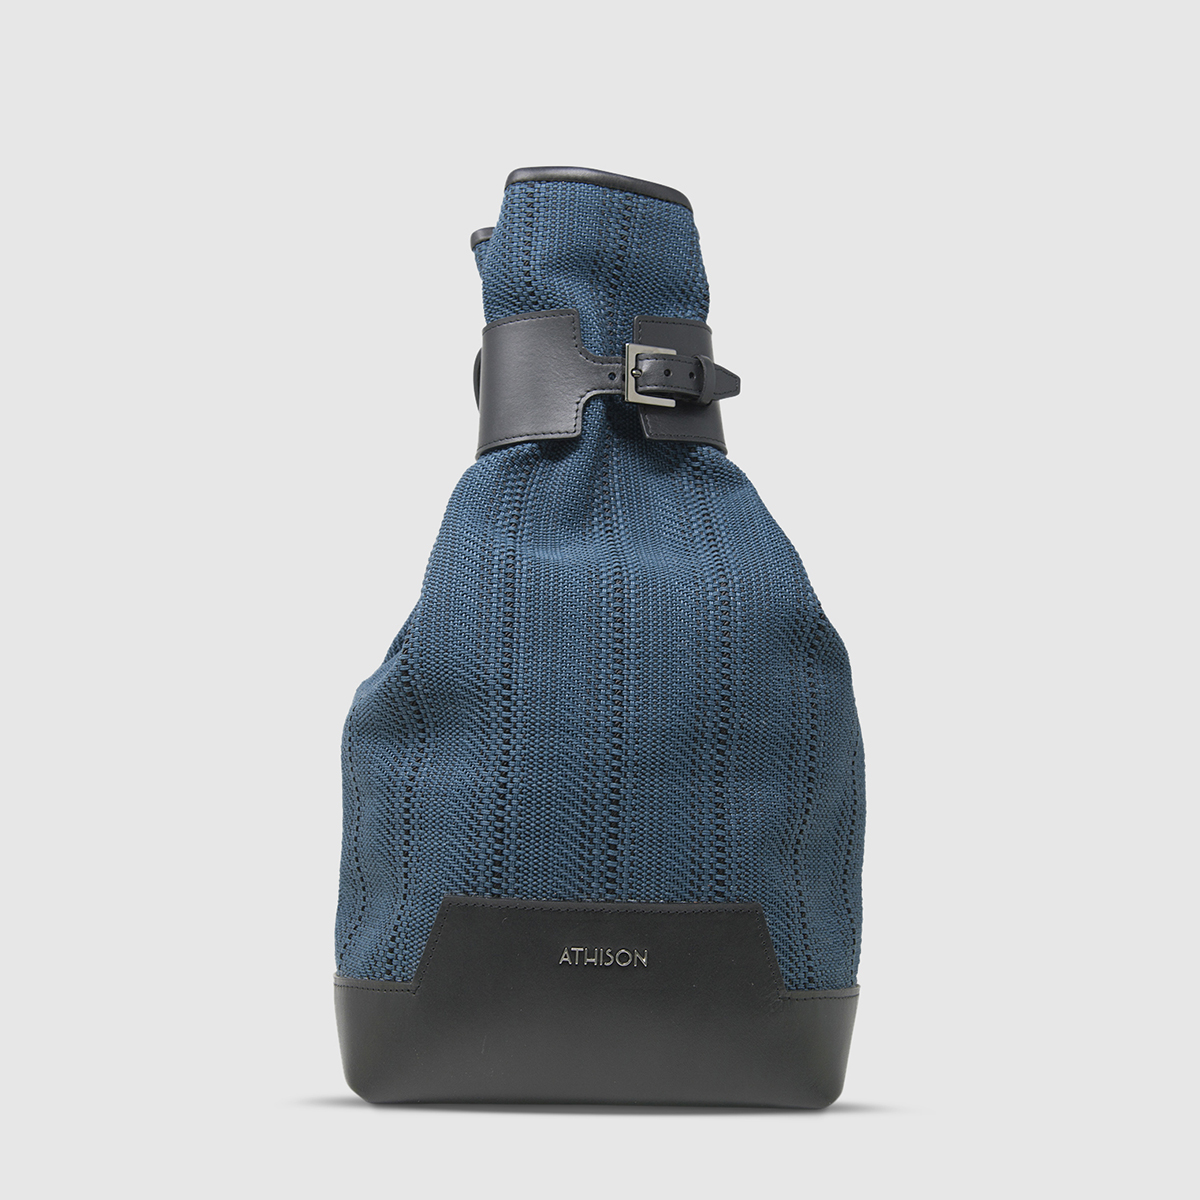 Athison Black/Jeans Alight Backpack Athison on sale 2022